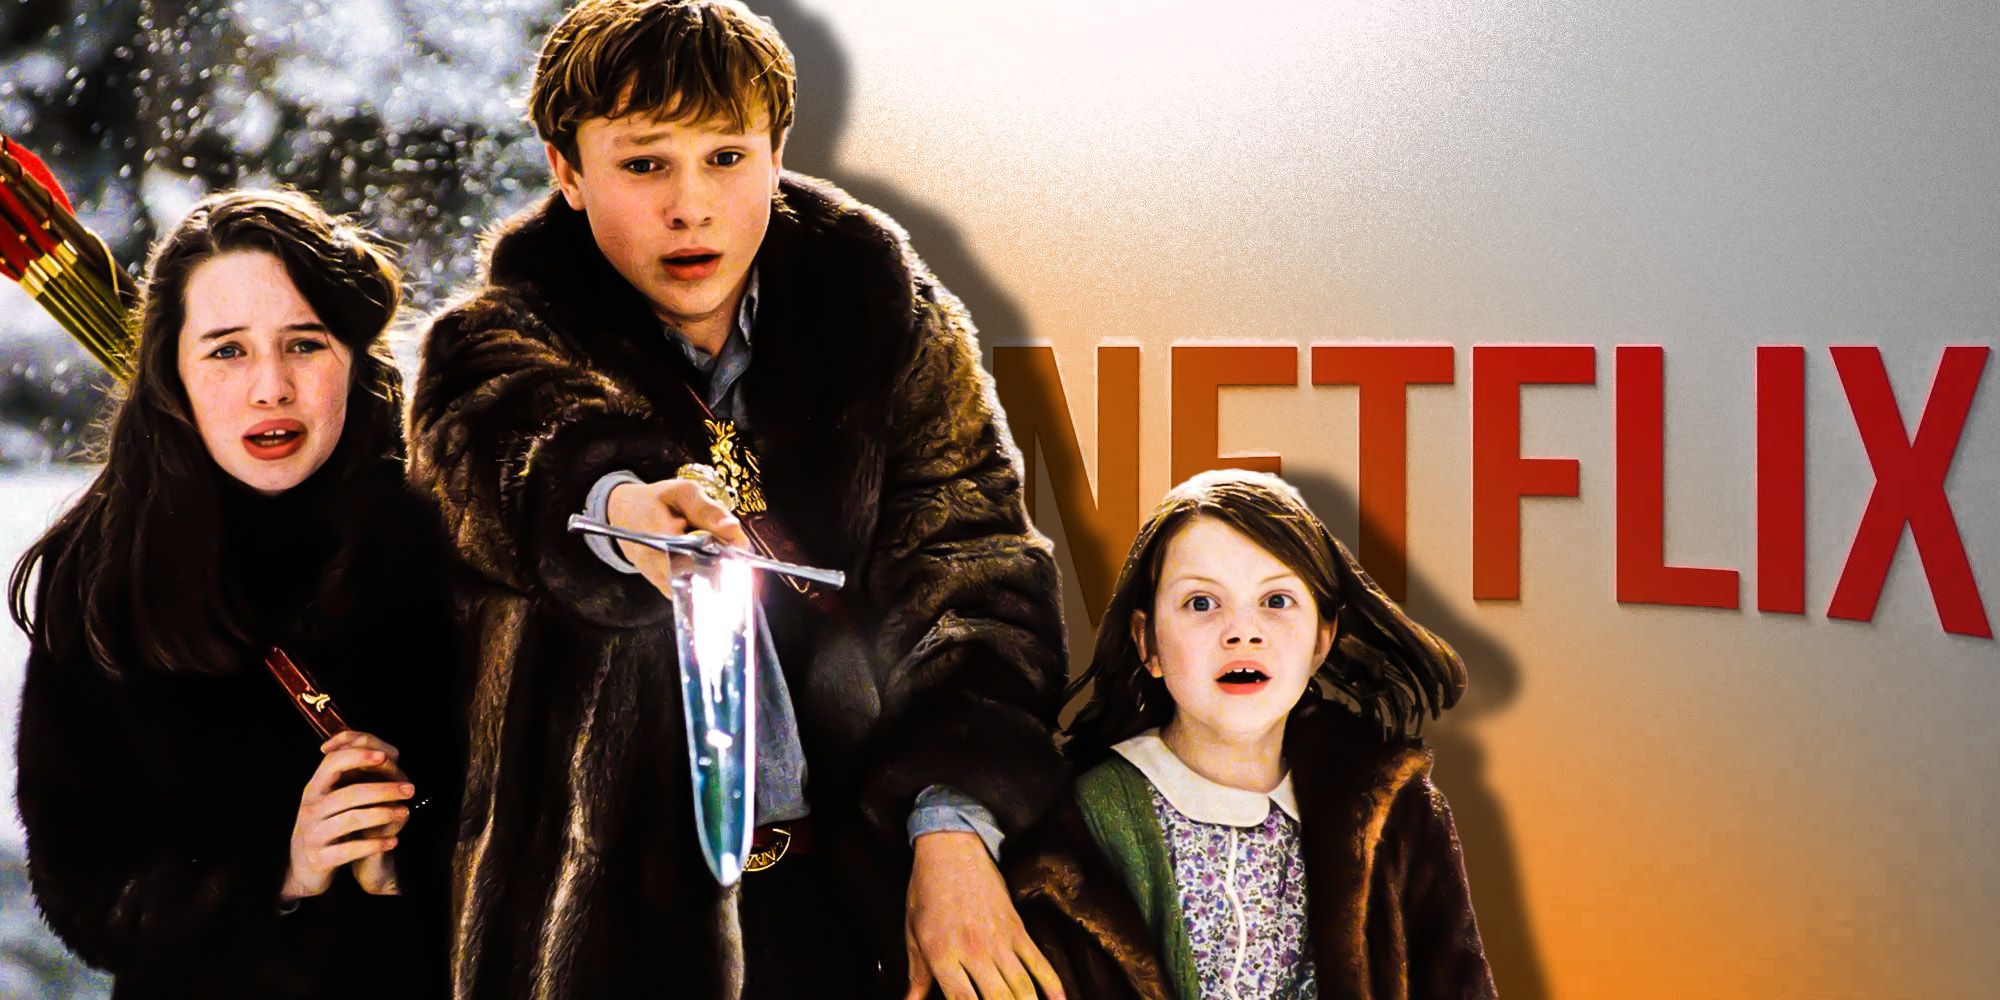 Blended image showing characters from The Chronicles of Narnia and the Netflix logo